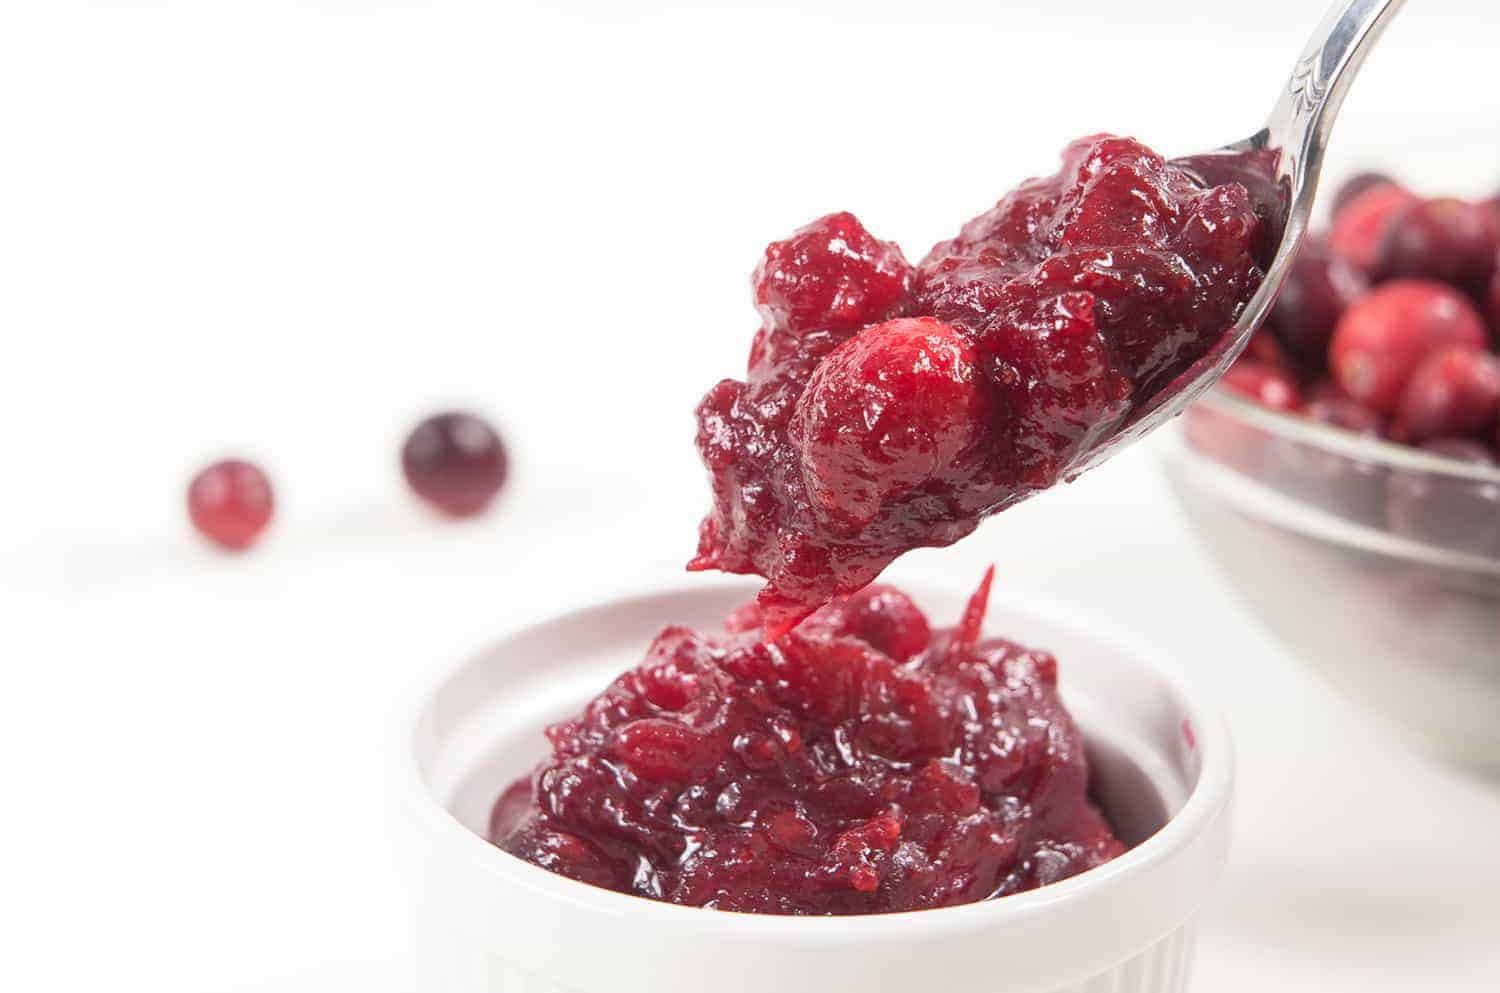 Easy Pressure Cooker Cranberry Sauce Recipe: Tangy & sweet fresh homemade cranberry sauce is great as a jam-like spread, topping for desserts, filling for pastries, glaze for meat, or extra flavor for yogurt/smoothie. Don't just save it for Thanksgiving dinner!